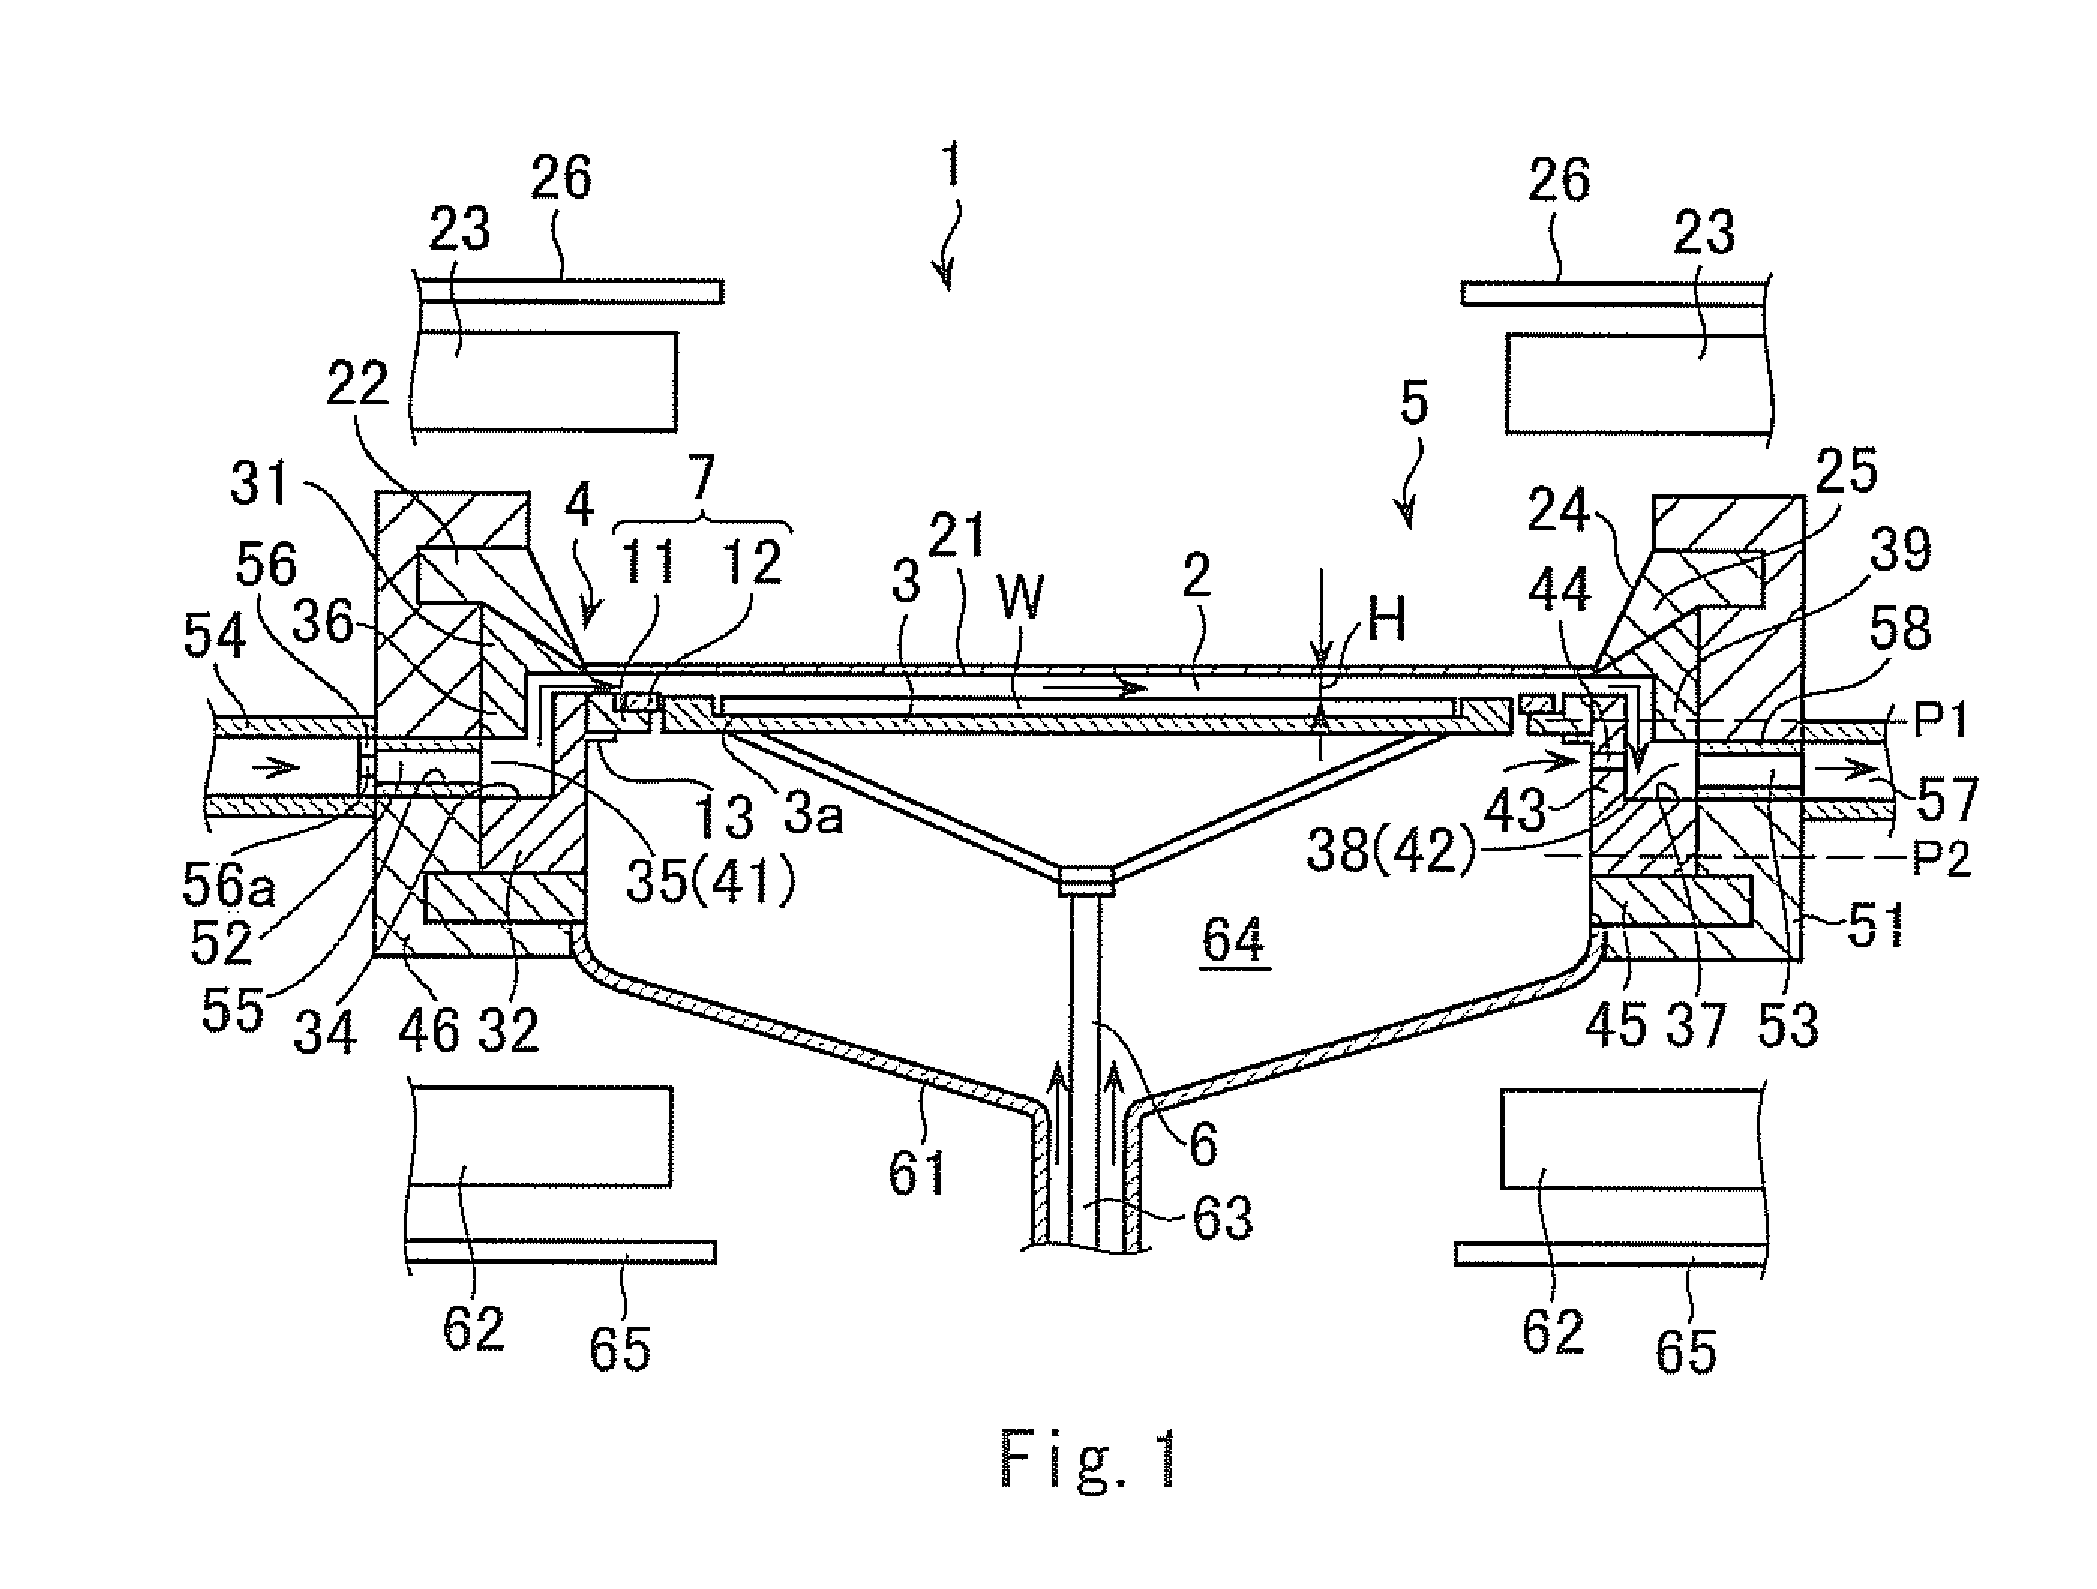 Film Forming Method Using Epitaxial Growth and Epitaxial Growth Apparatus